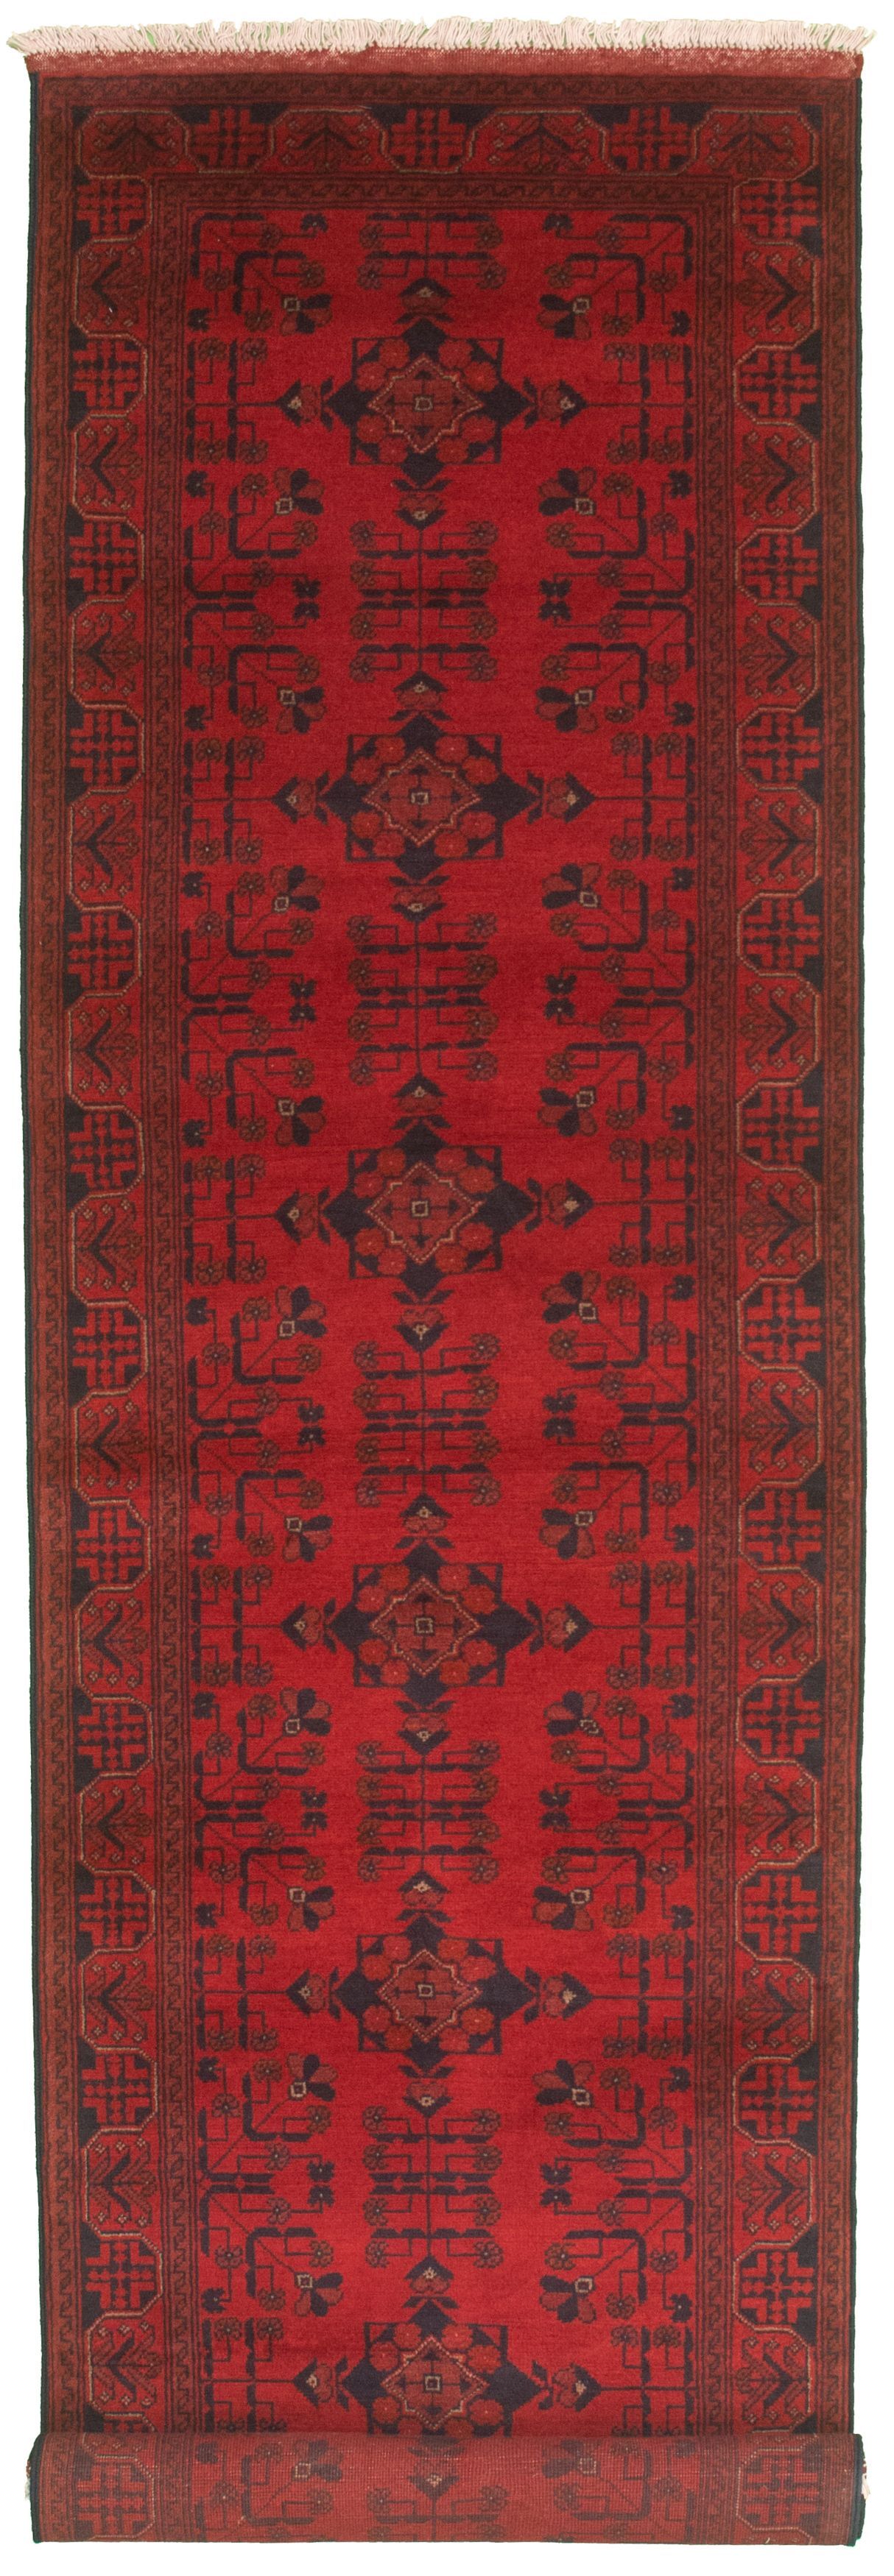 Hand-knotted Finest Khal Mohammadi Red Wool Rug 2'9" x 12'6" Size: 2'9" x 12'6"  